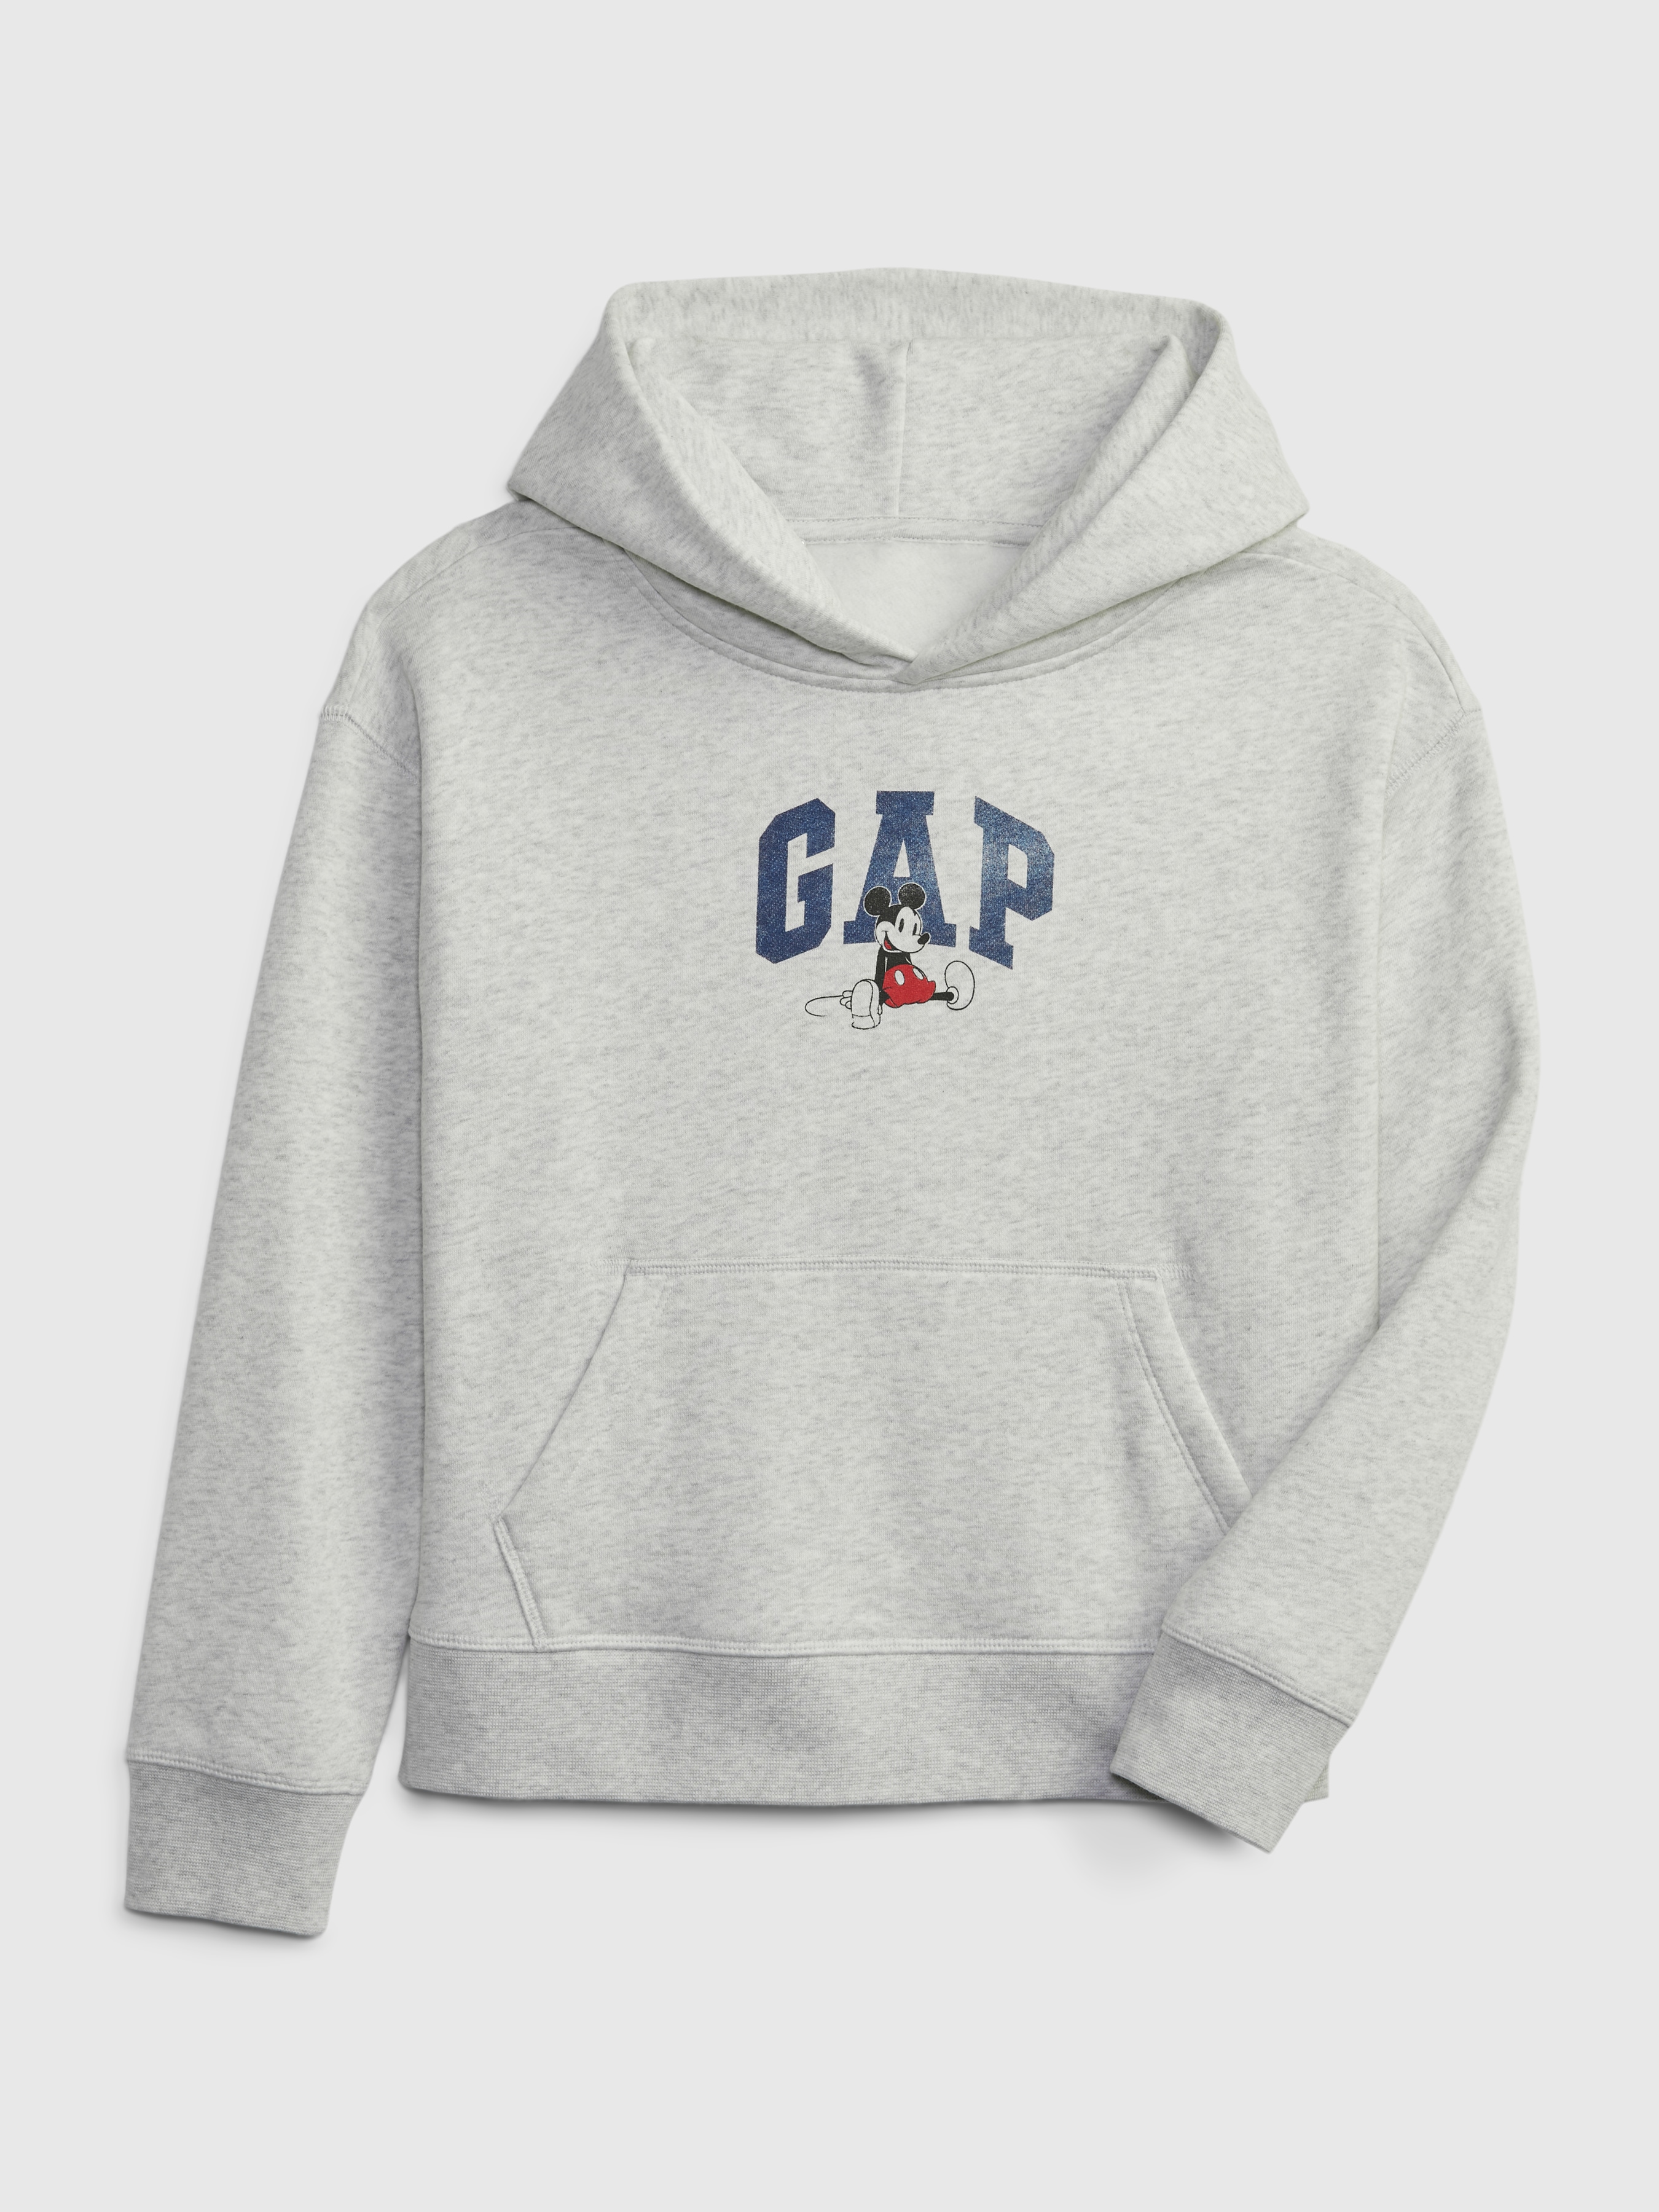 NEW GAP GRAPHIC HOODIE SIZE XS 4/5 S 6/7 M 8 